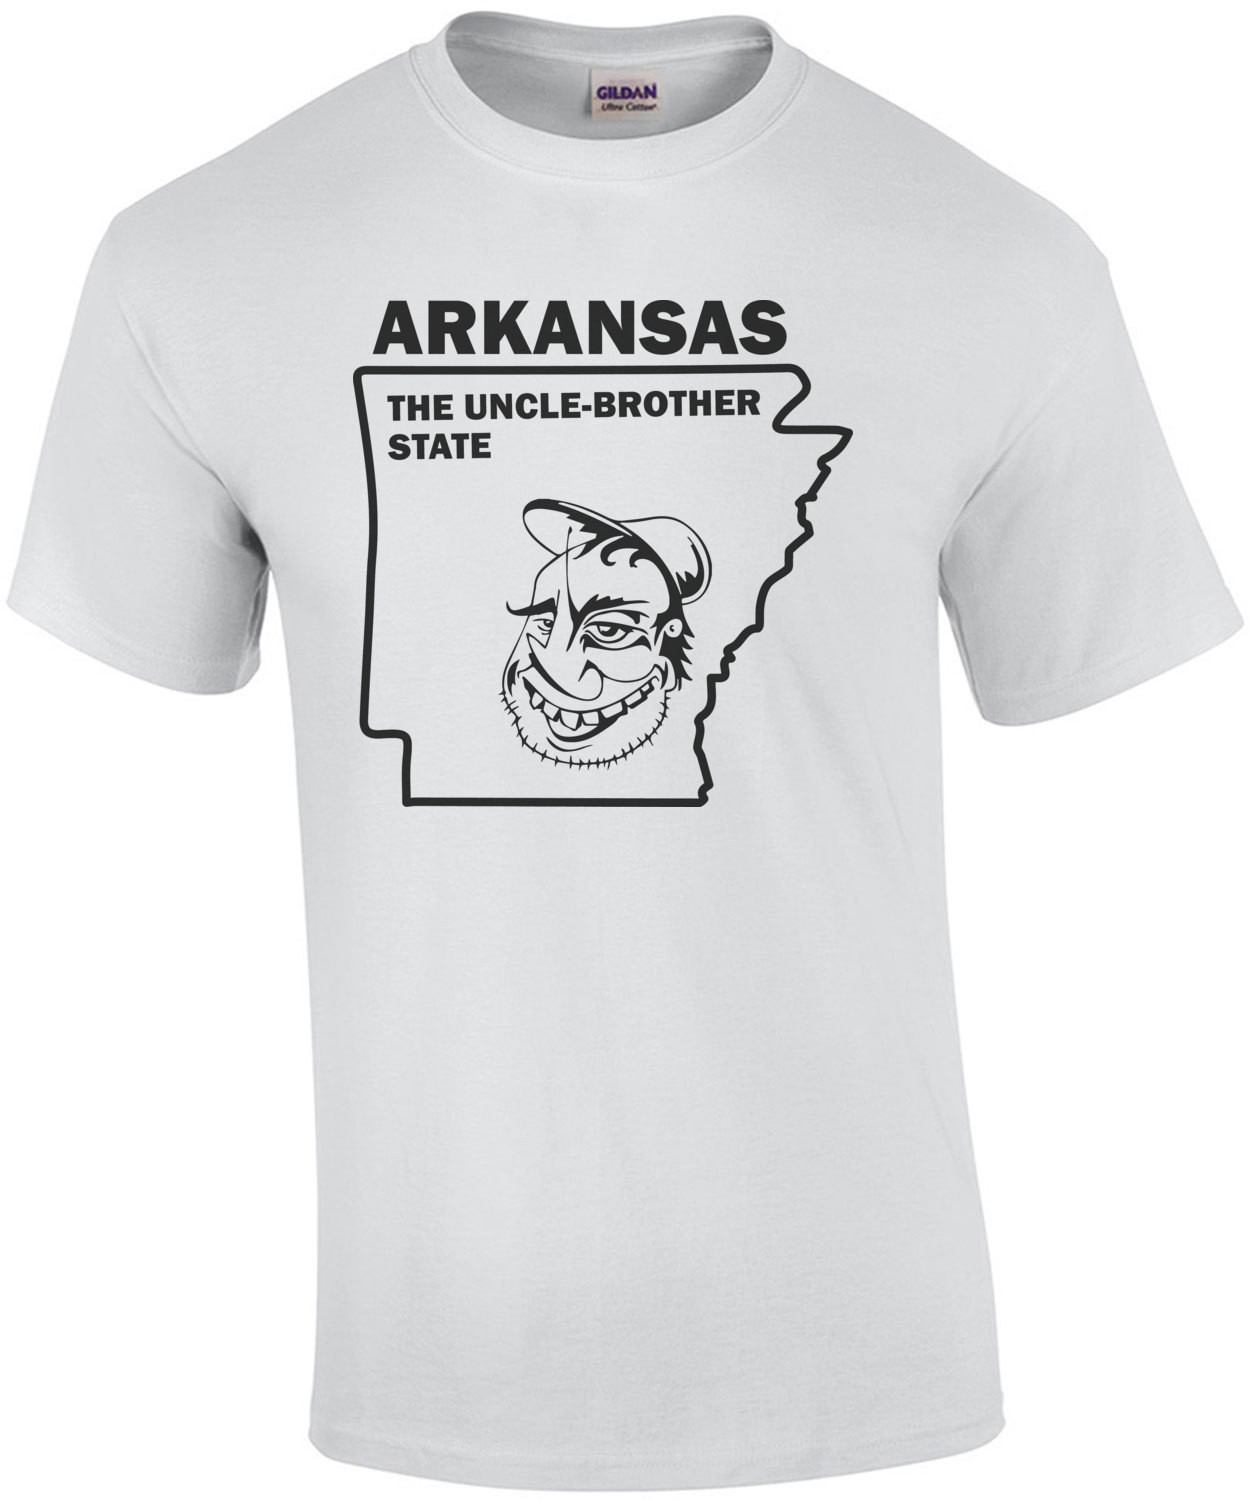 Arkansas - The uncle-brother state - Arkansas T-Shirt